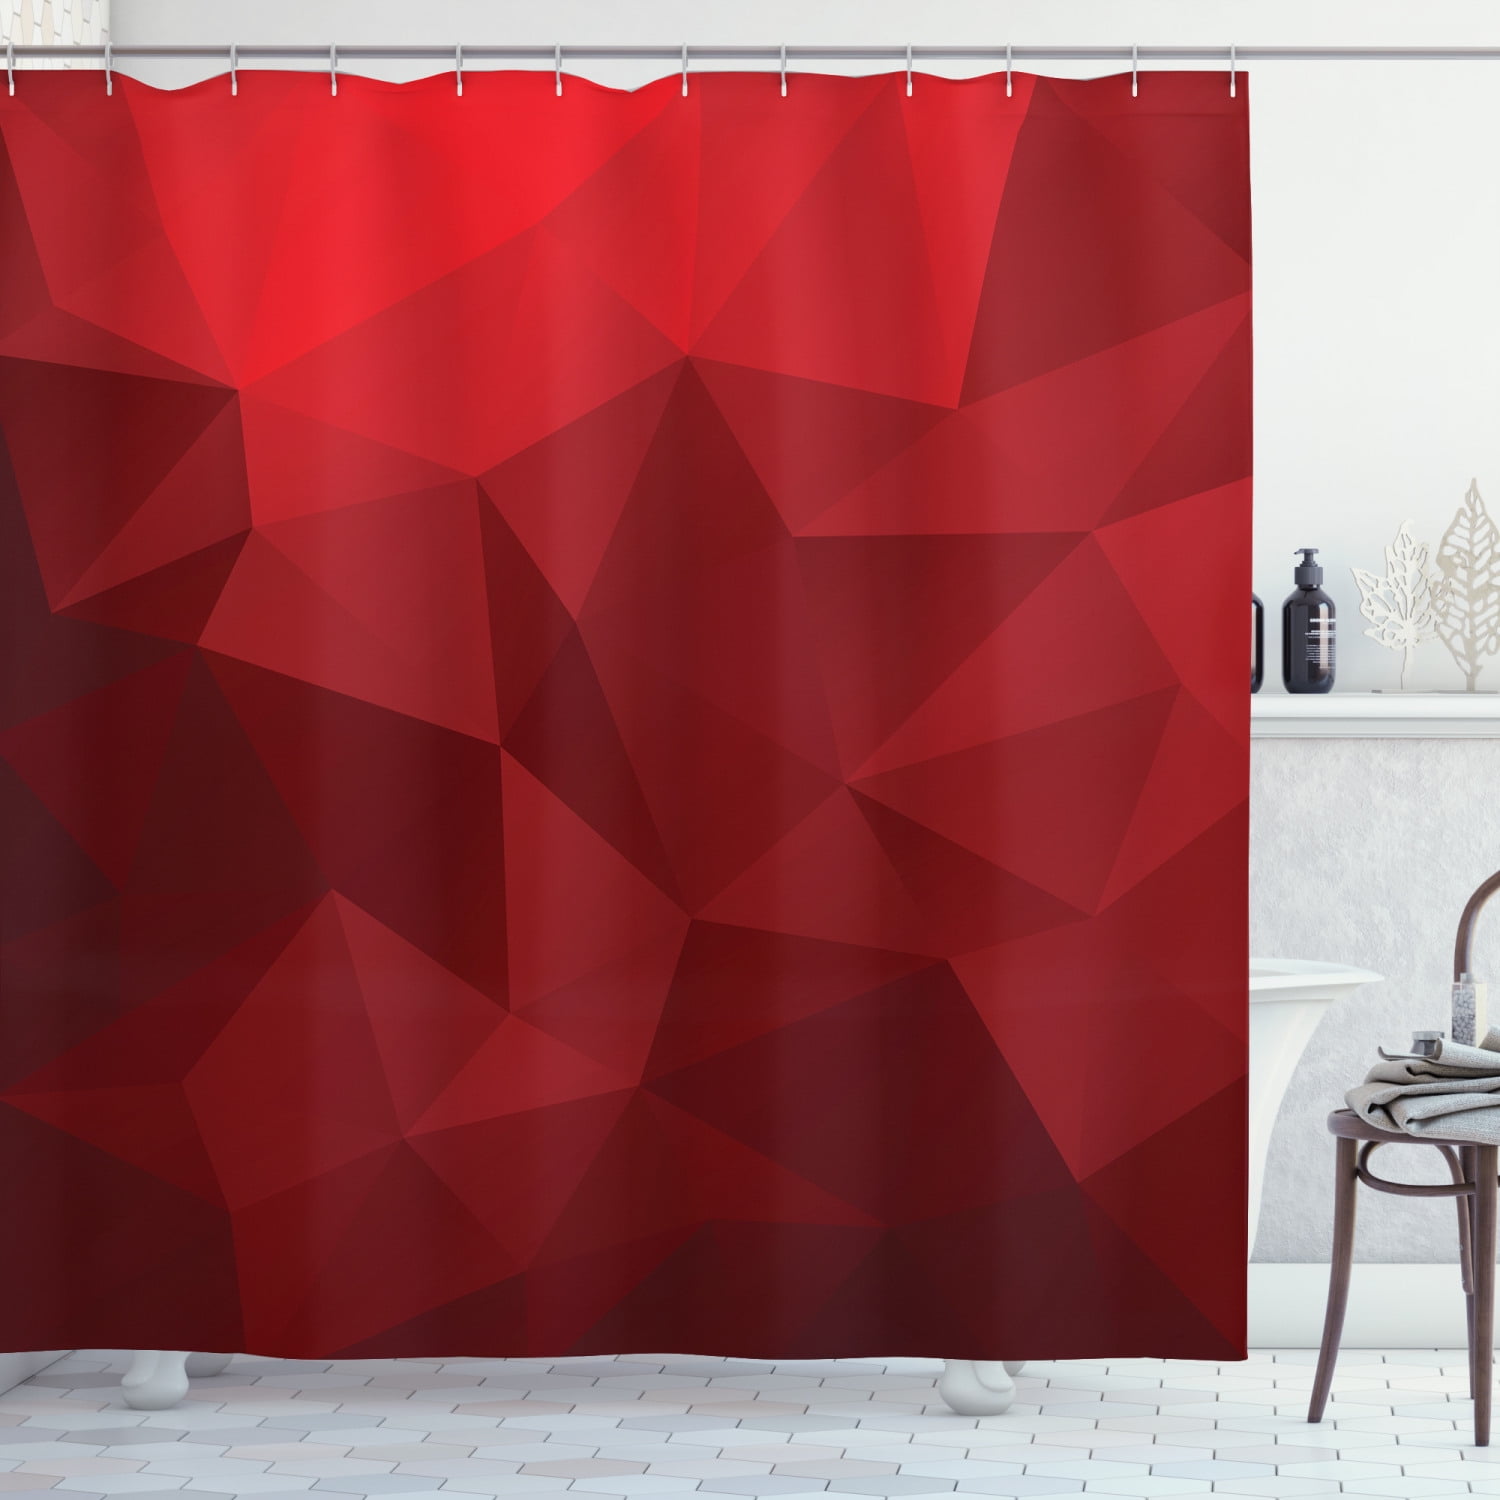 Red Shower Curtain Triangular Mosaic In Shades Of Red With Low Poly